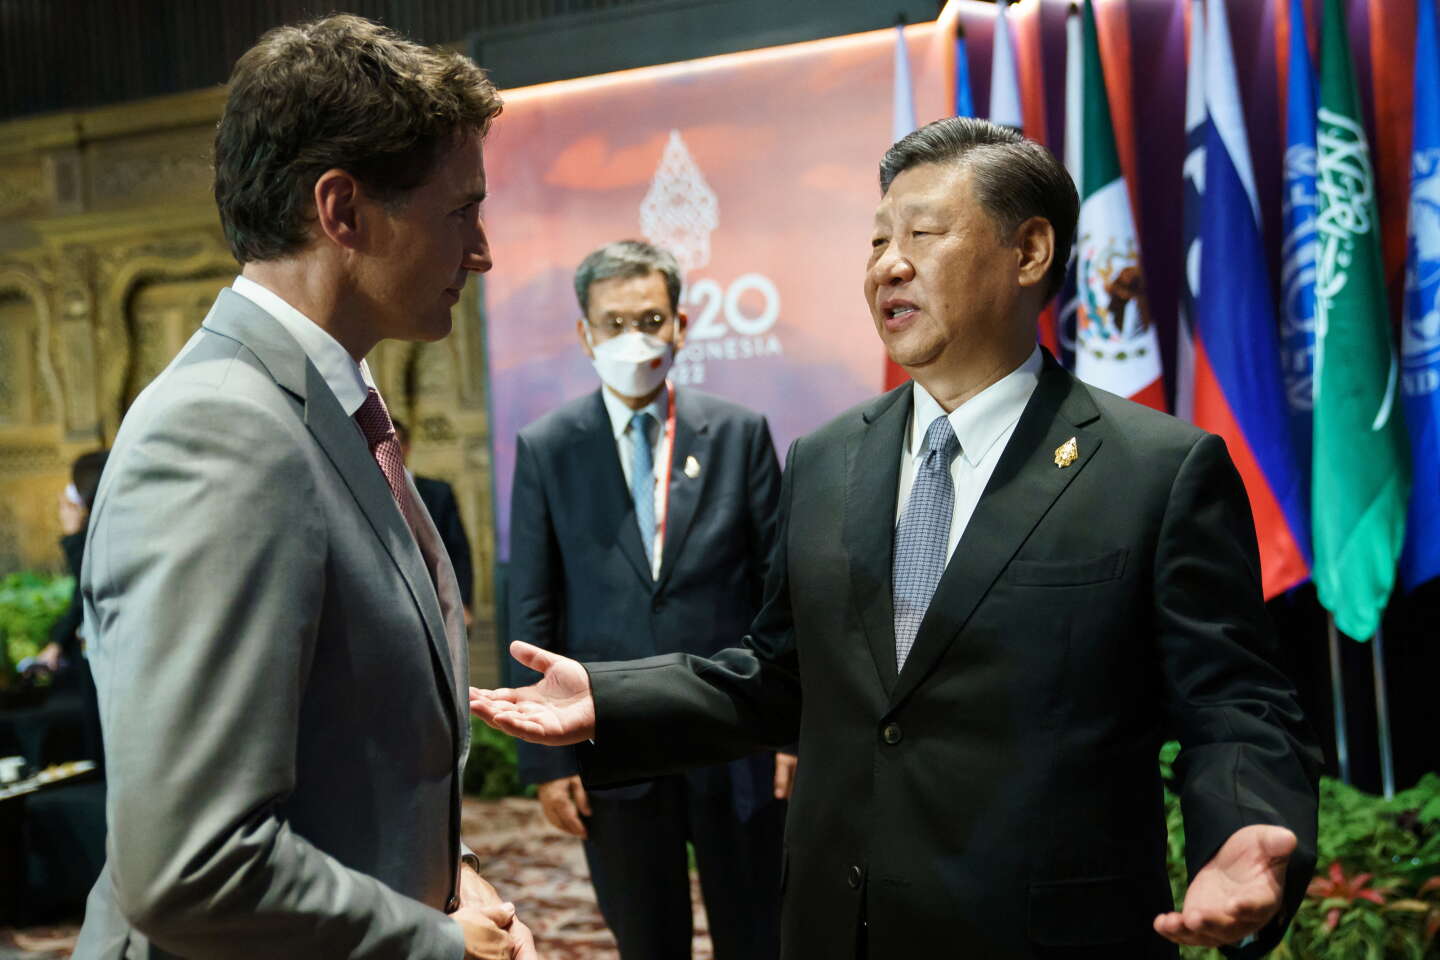 In Canada, Trudeau has been accused of laziness in the face of allegations of Chinese interference